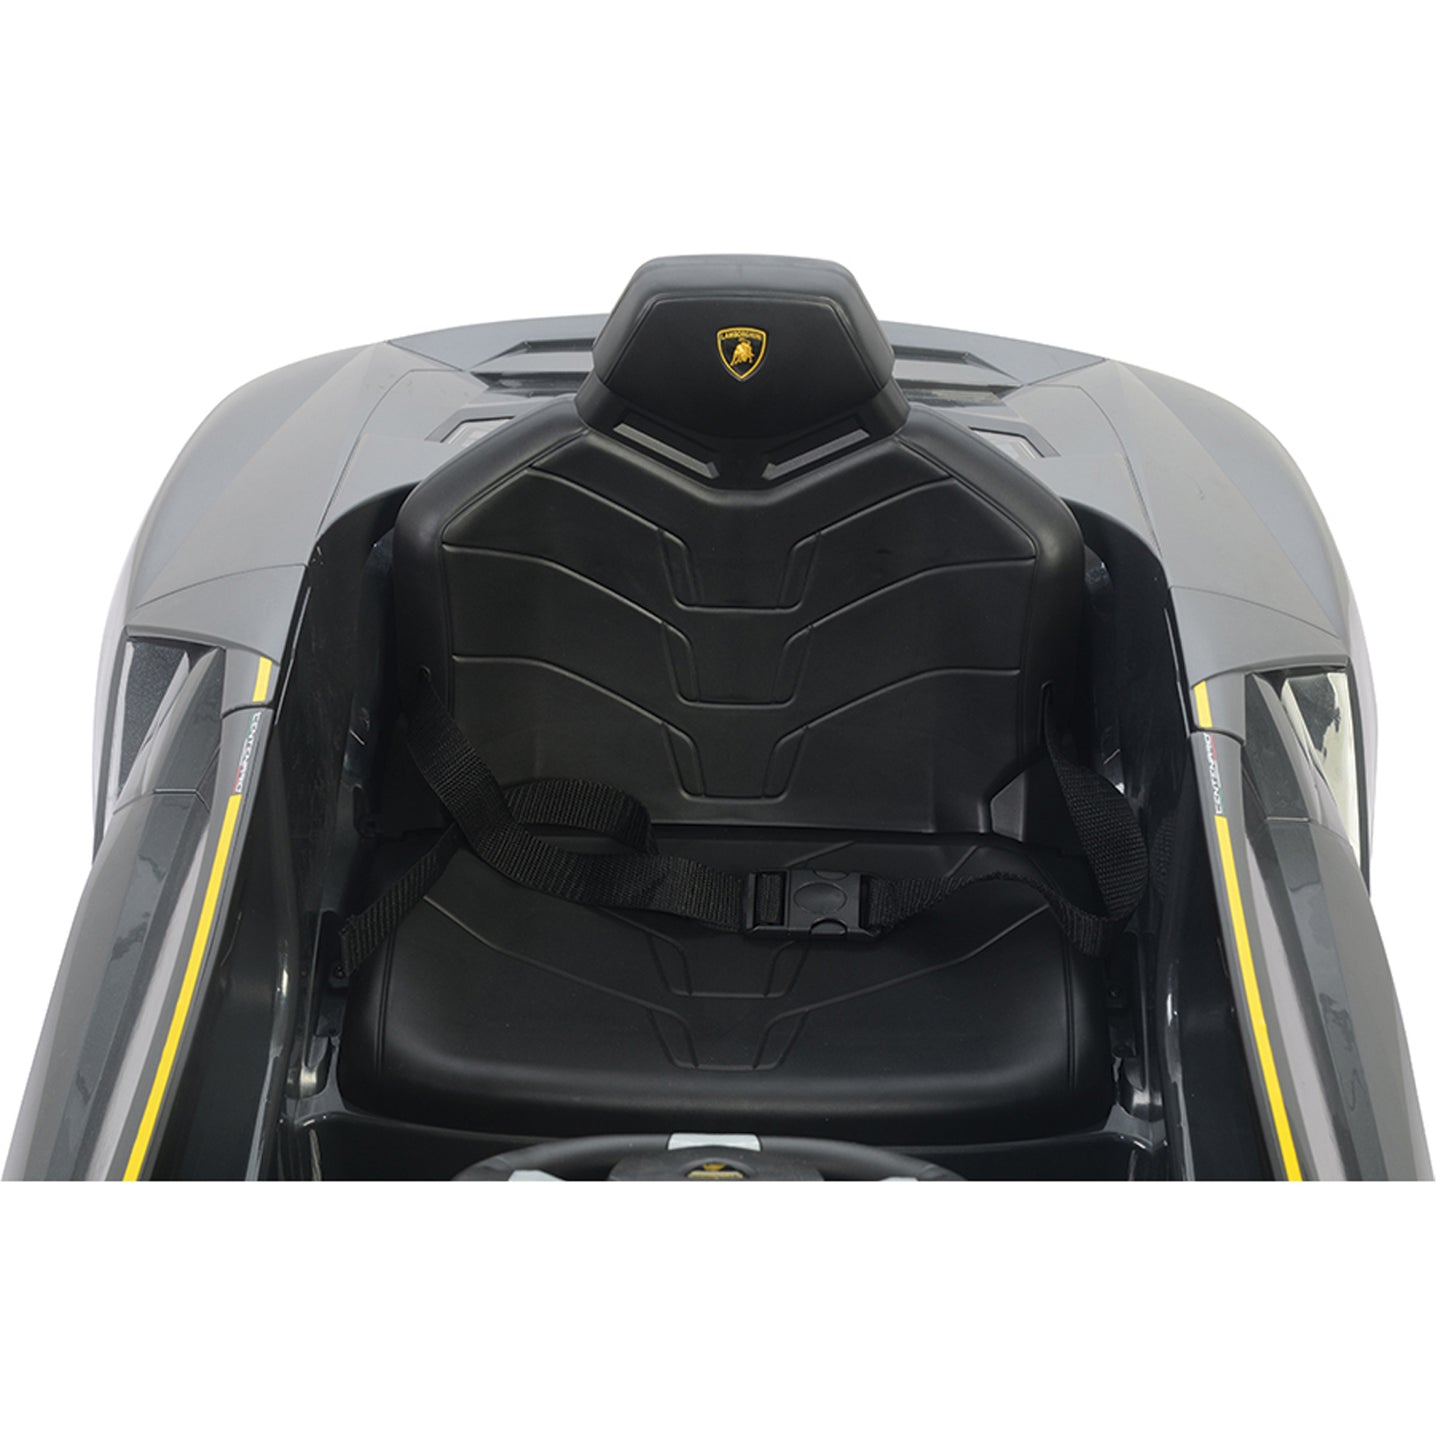 Officially Licensed Lamborghini 12V  Wheel Power Battery Operated Ride On